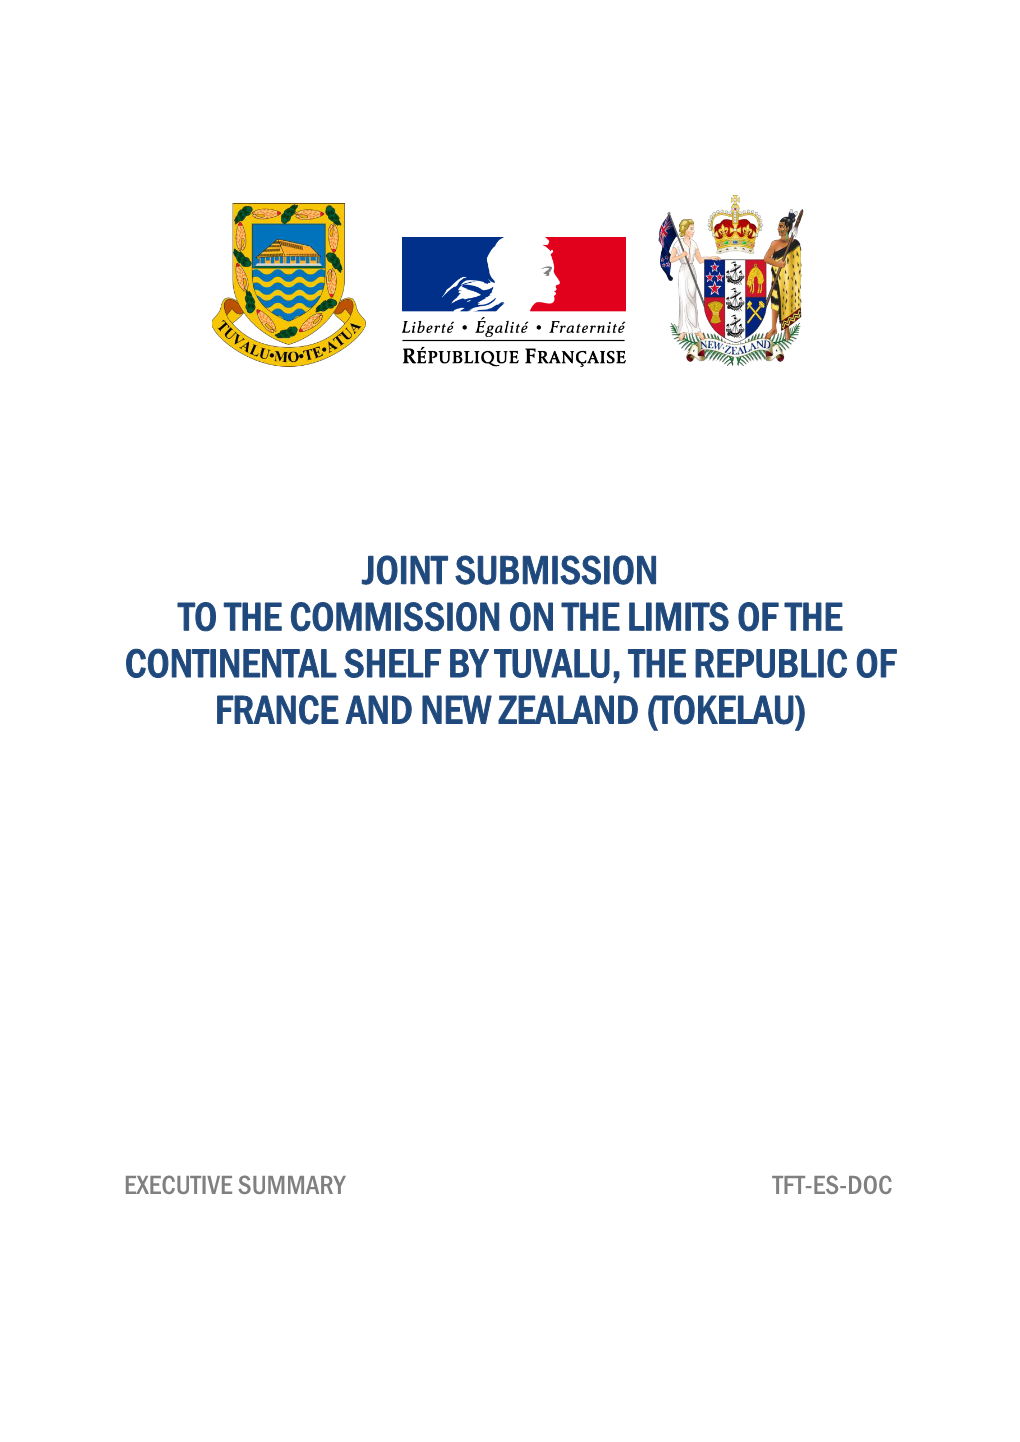 Joint Submission to the Commission on the Limits of the Continental Shelf by Tuvalu, the Republic of France and New Zealand (Tokelau)